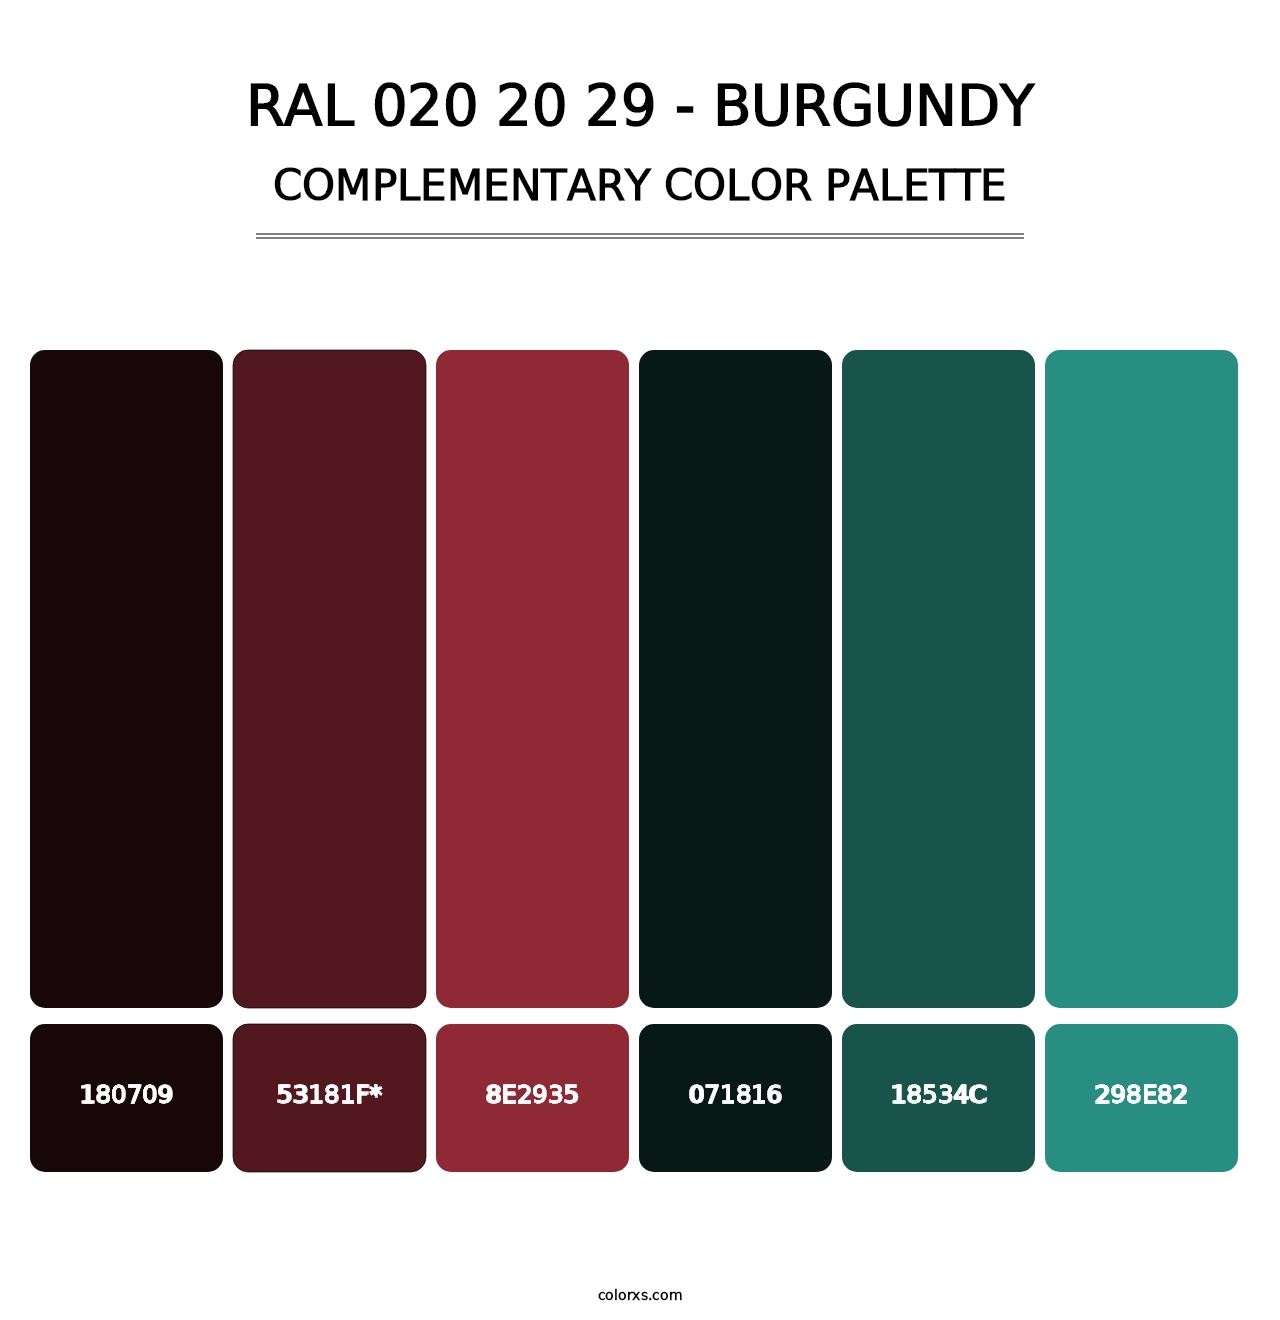 RAL 020 20 29 - Burgundy - Complementary Color Palette